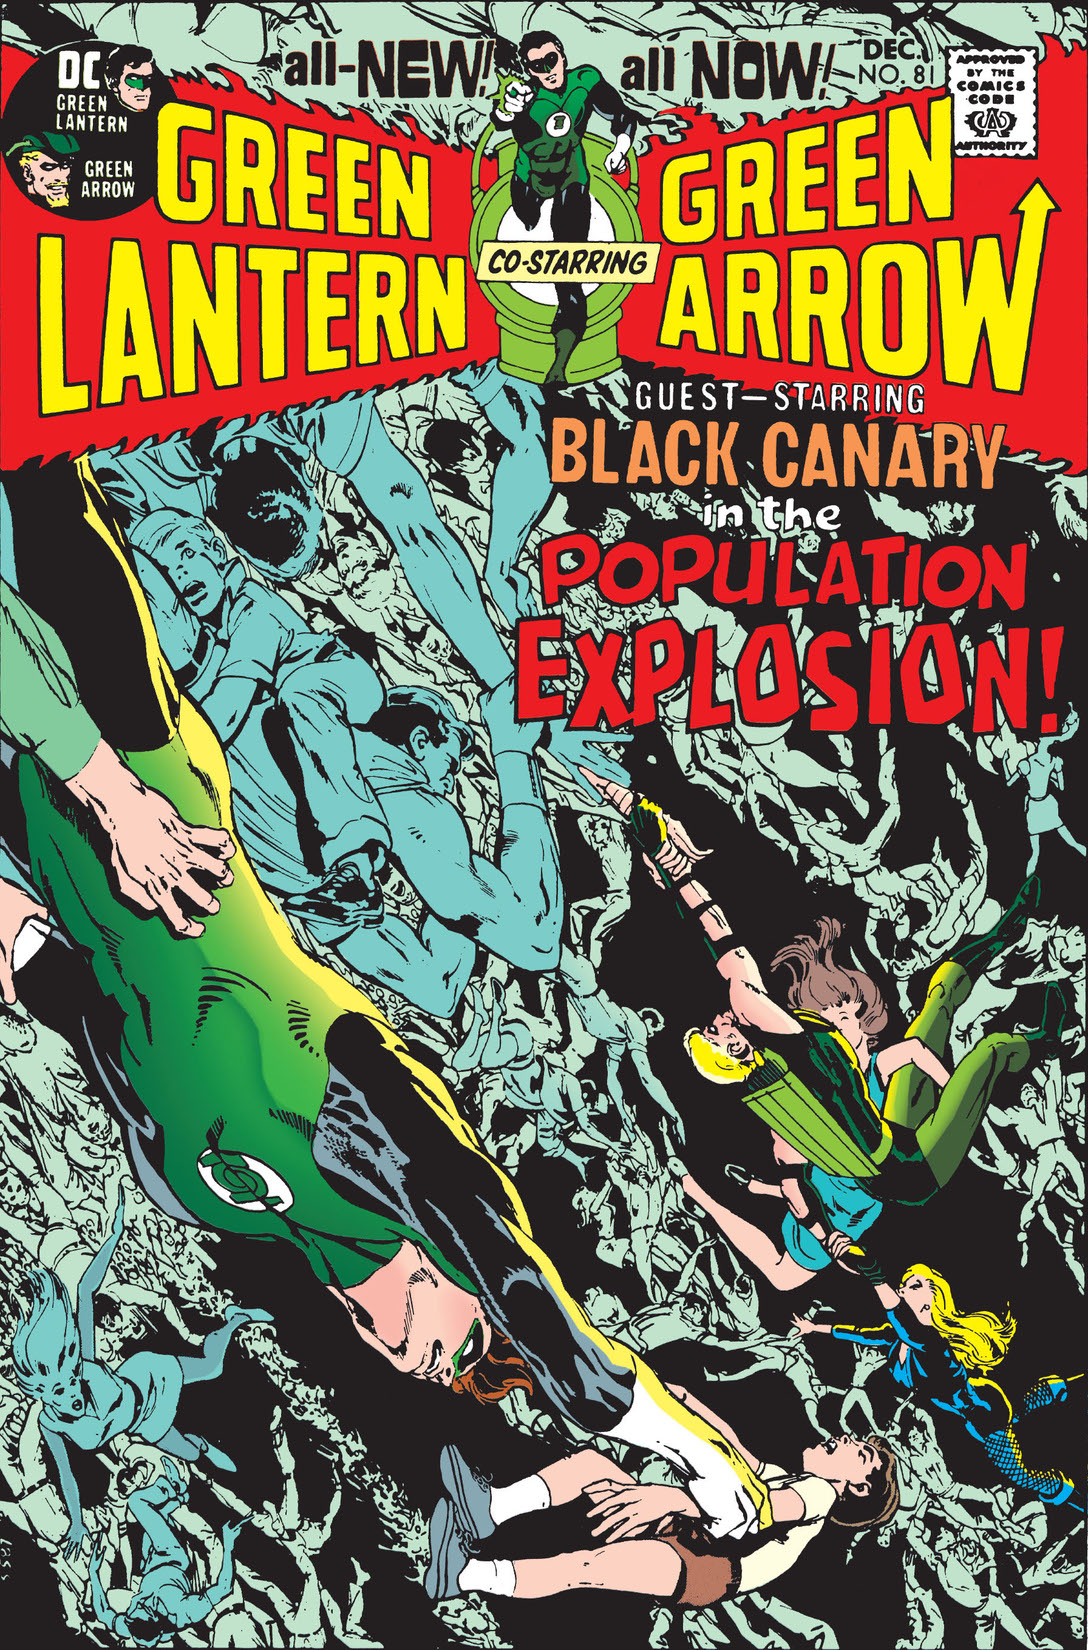 Green Lantern (1960-) #81 preview images